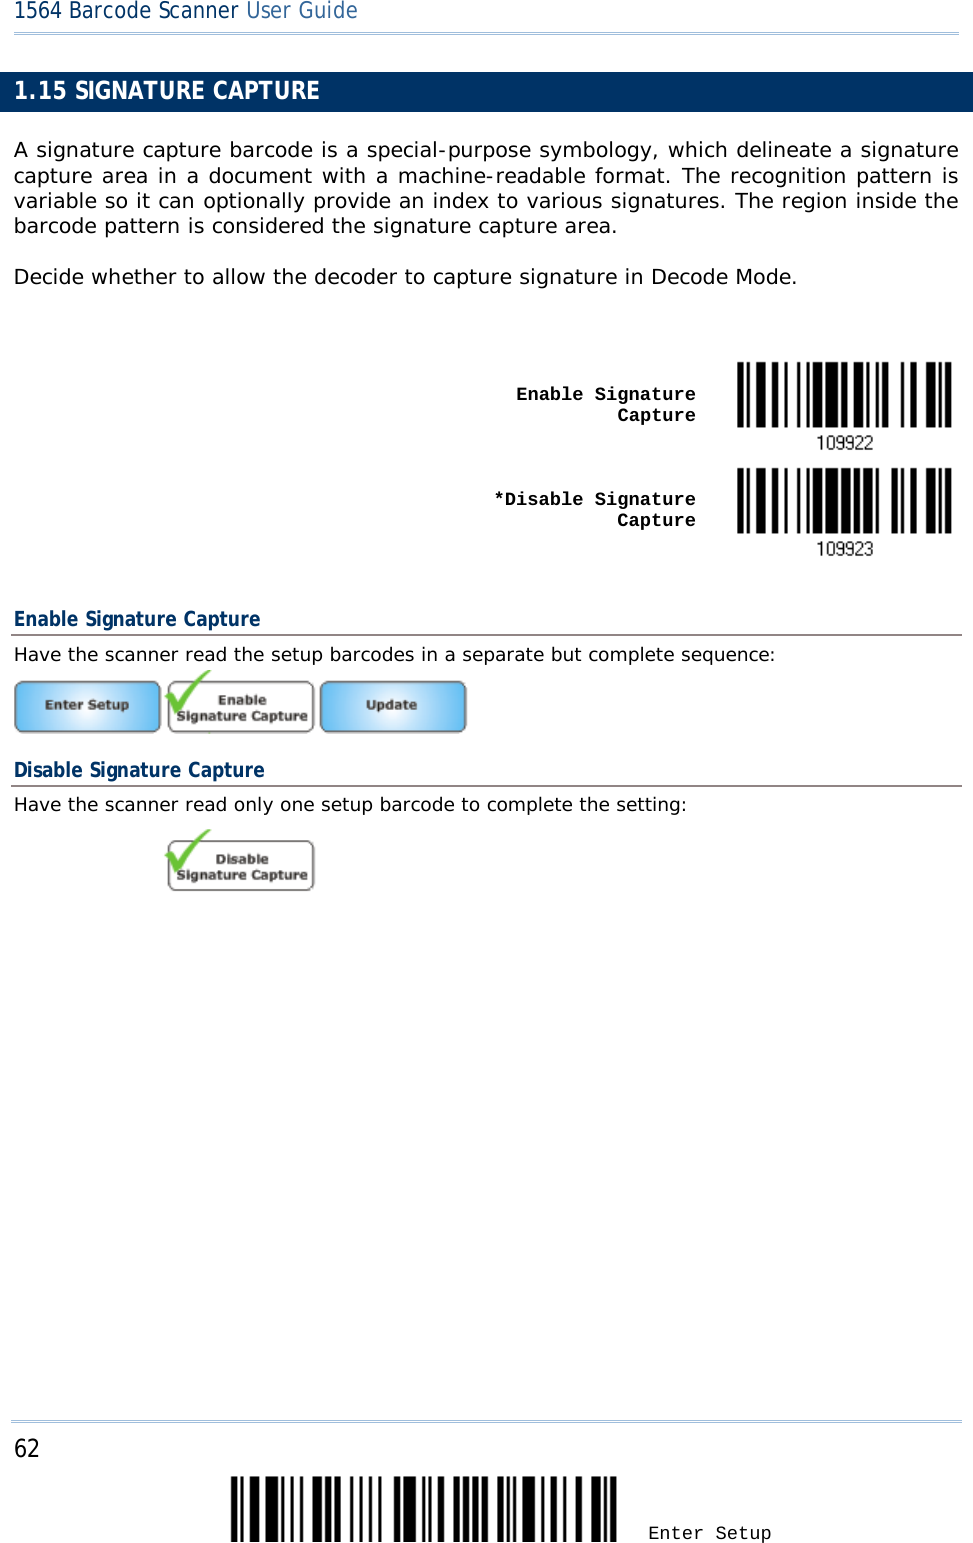 62 Enter Setup 1564 Barcode Scanner User Guide  1.15 SIGNATURE CAPTURE A signature capture barcode is a special-purpose symbology, which delineate a signature capture area in a document with a machine-readable format. The recognition pattern is variable so it can optionally provide an index to various signatures. The region inside the barcode pattern is considered the signature capture area. Decide whether to allow the decoder to capture signature in Decode Mode.     Enable Signature Capture       *Disable Signature Capture   Enable Signature Capture Have the scanner read the setup barcodes in a separate but complete sequence:  Disable Signature Capture Have the scanner read only one setup barcode to complete the setting:                    